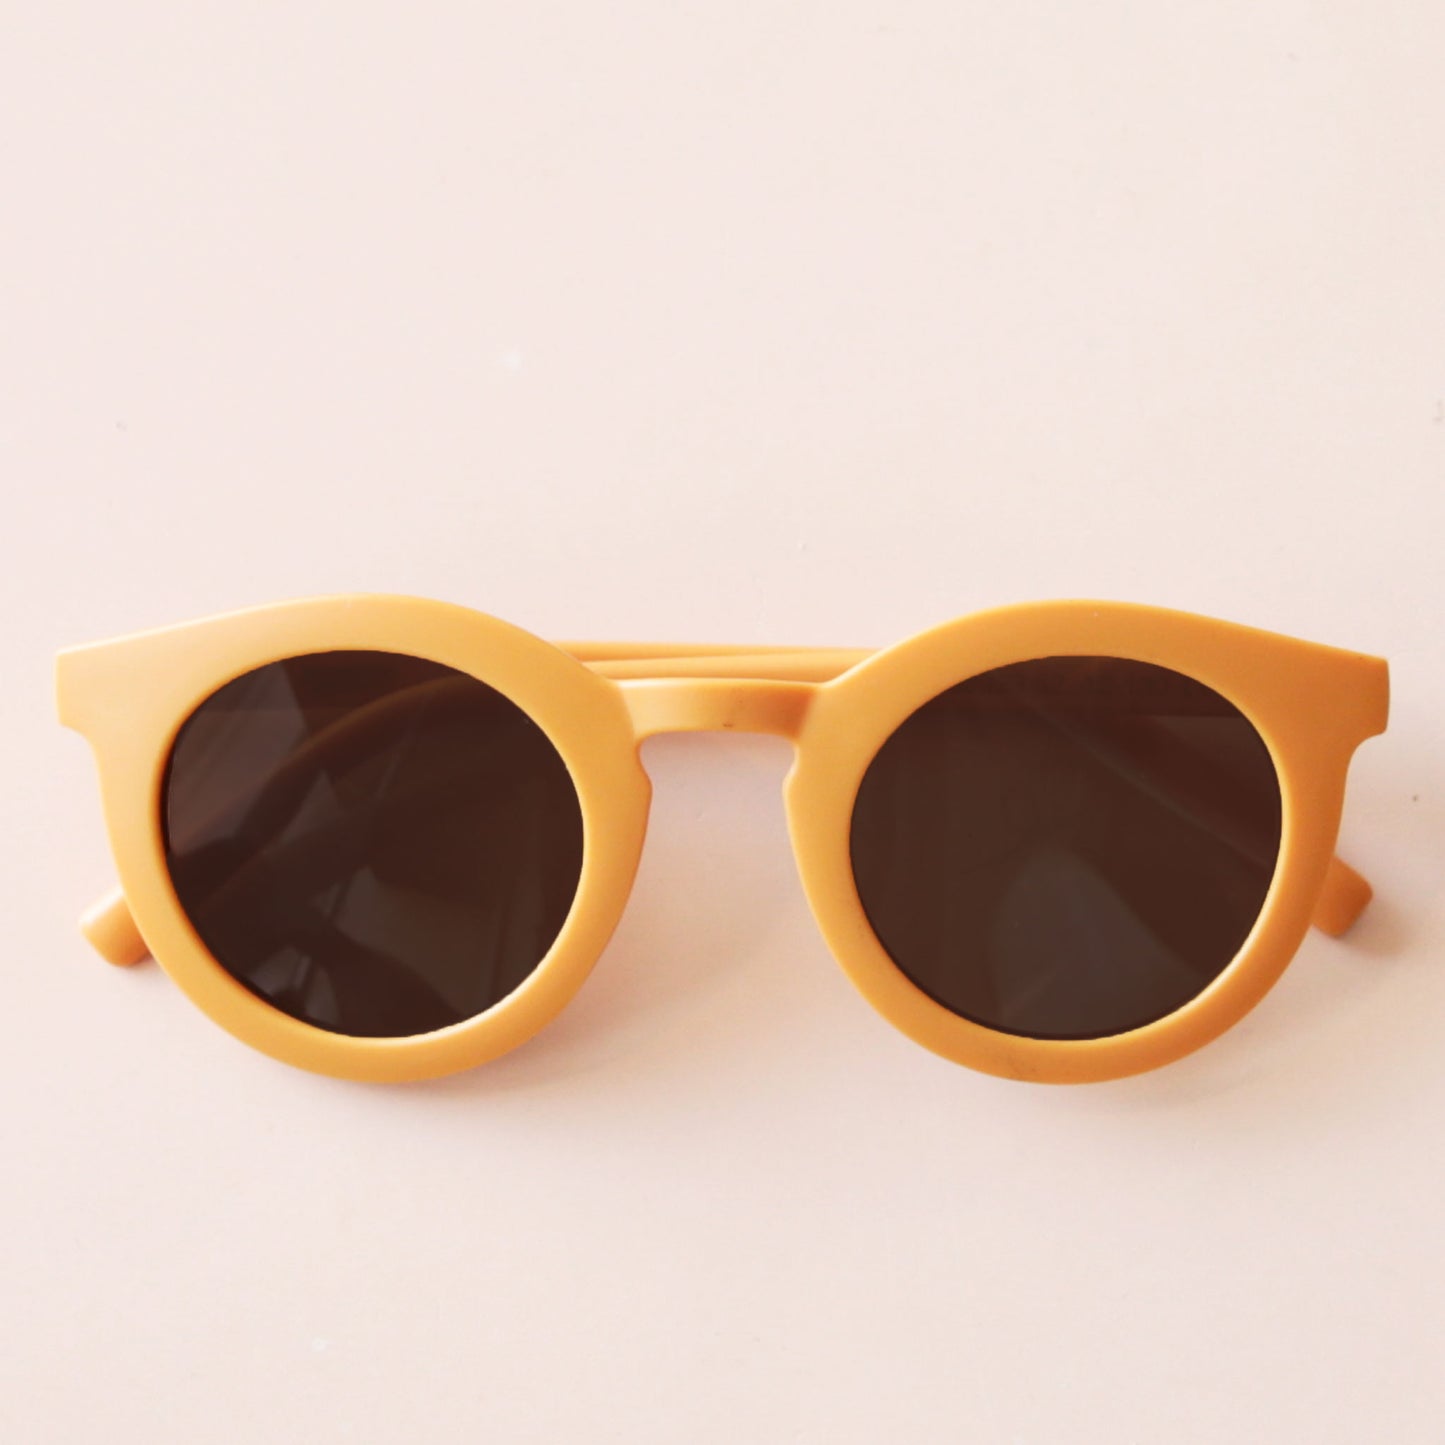 On a neutral background is a yellow pair of circle children's sunglasses.